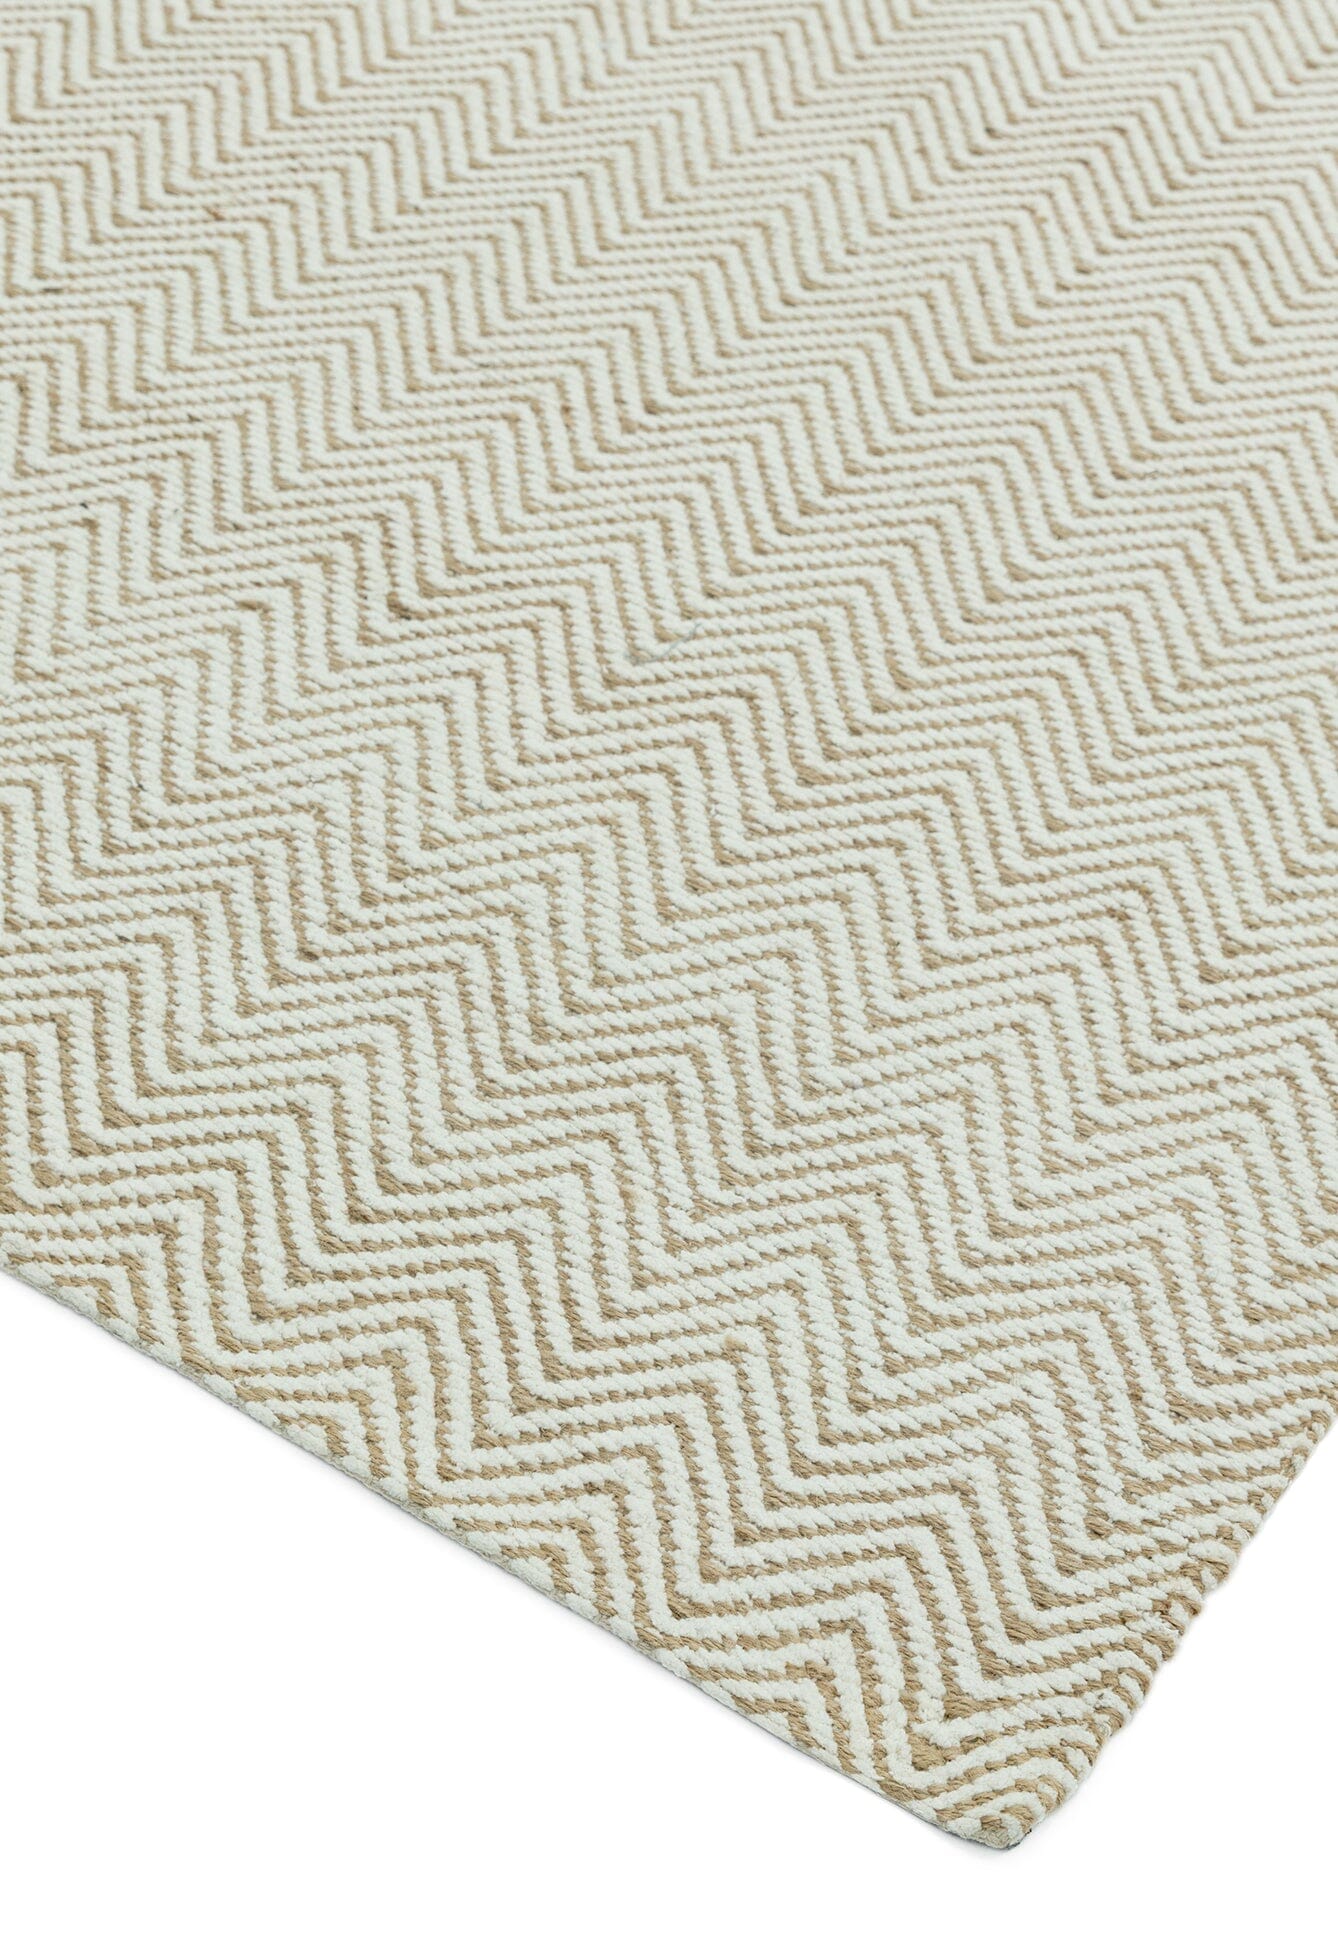 Asiatic Carpets Ives Hand Woven Rug Natural - 100 x 150cm